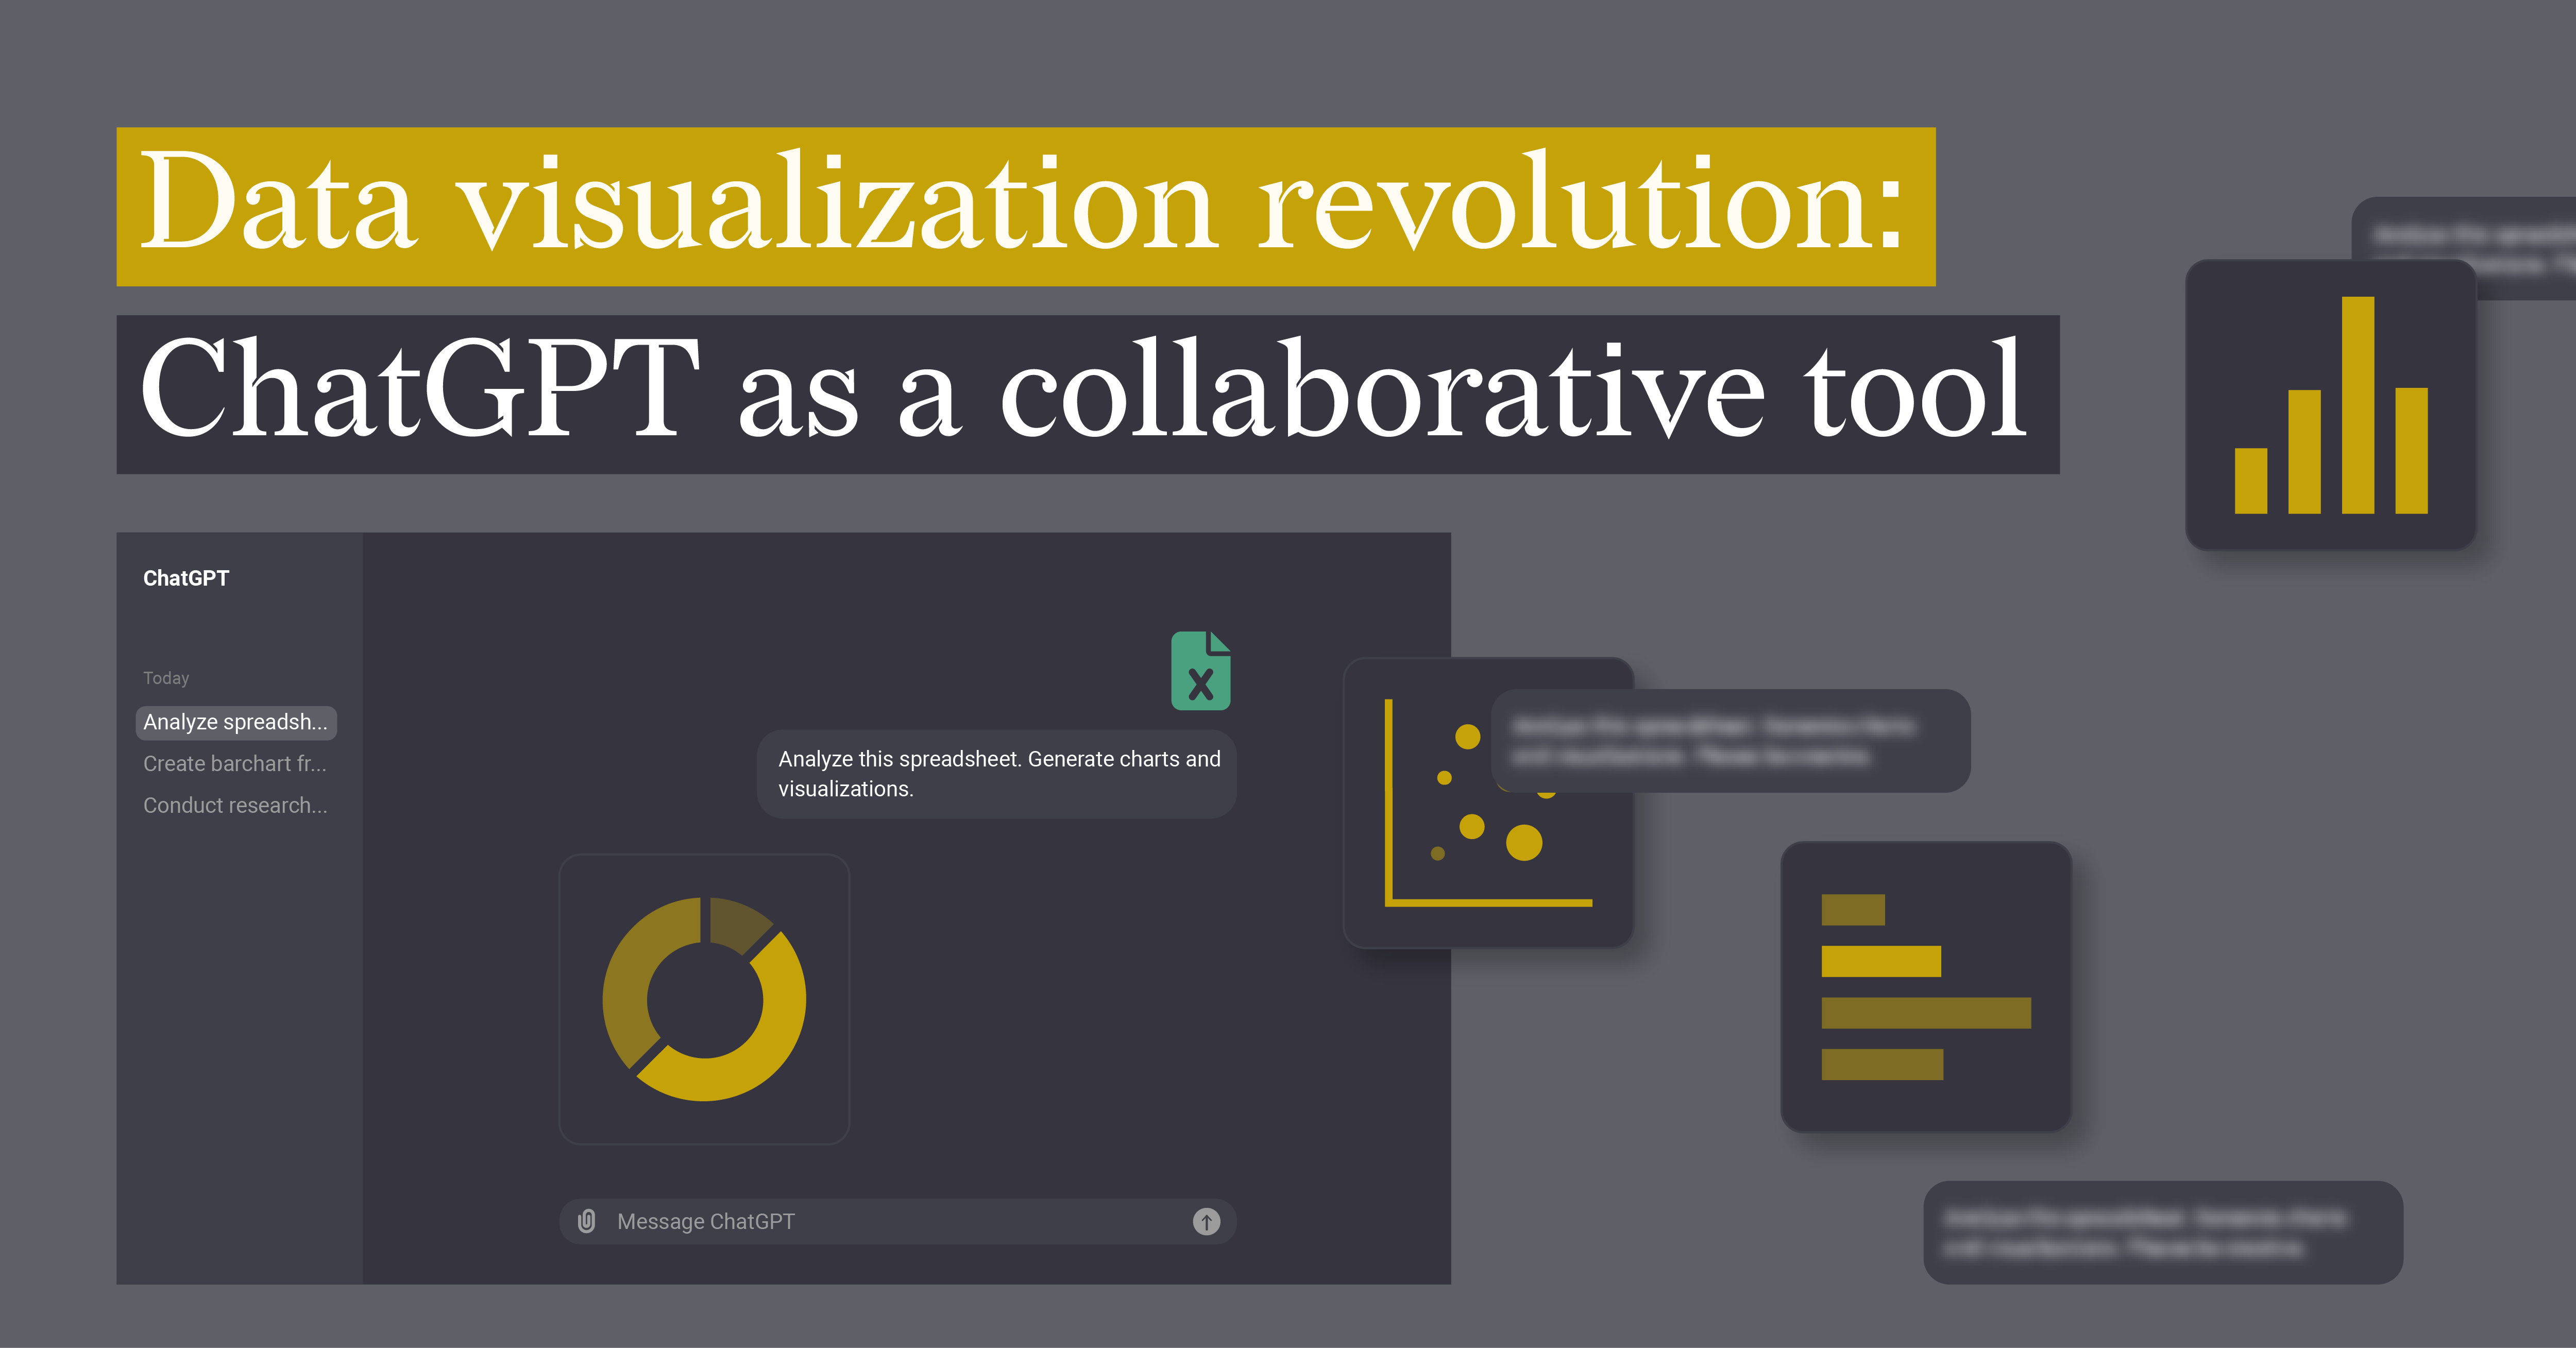 Data visualization revolution: ChatGPT as a collaborative tool,' showing an interface of ChatGPT with prompts like 'Analyze spreadsheet,' 'Create barchart,' and visual representations of charts and graphs in yellow and dark gray.